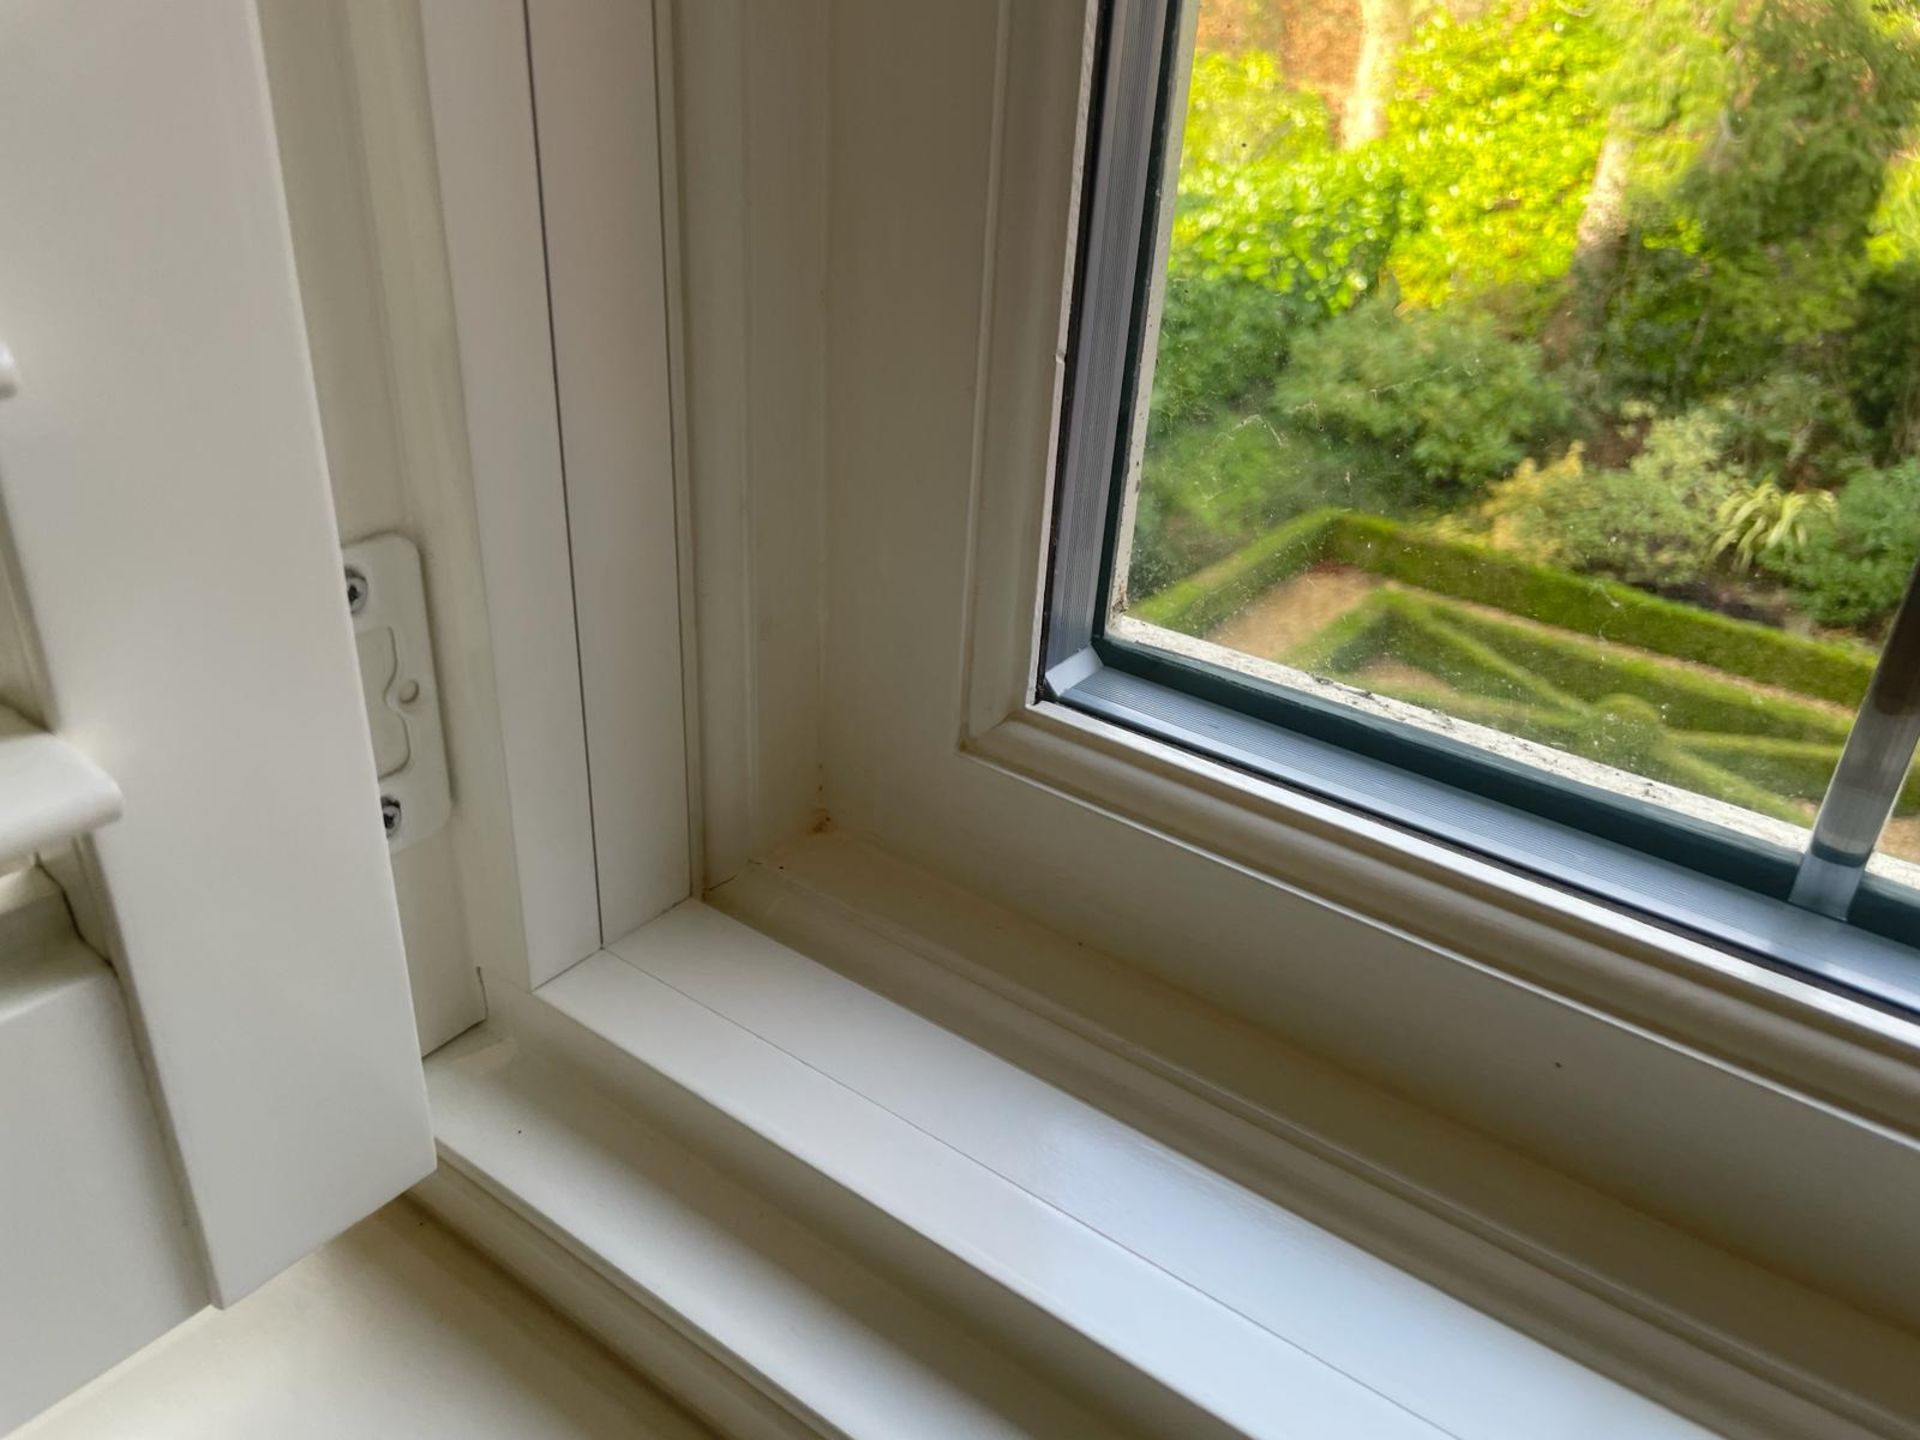 1 x Hardwood Timber Double Glazed Leaded 3-Pane Window Frame fitted with Shutter Blinds - Image 9 of 12